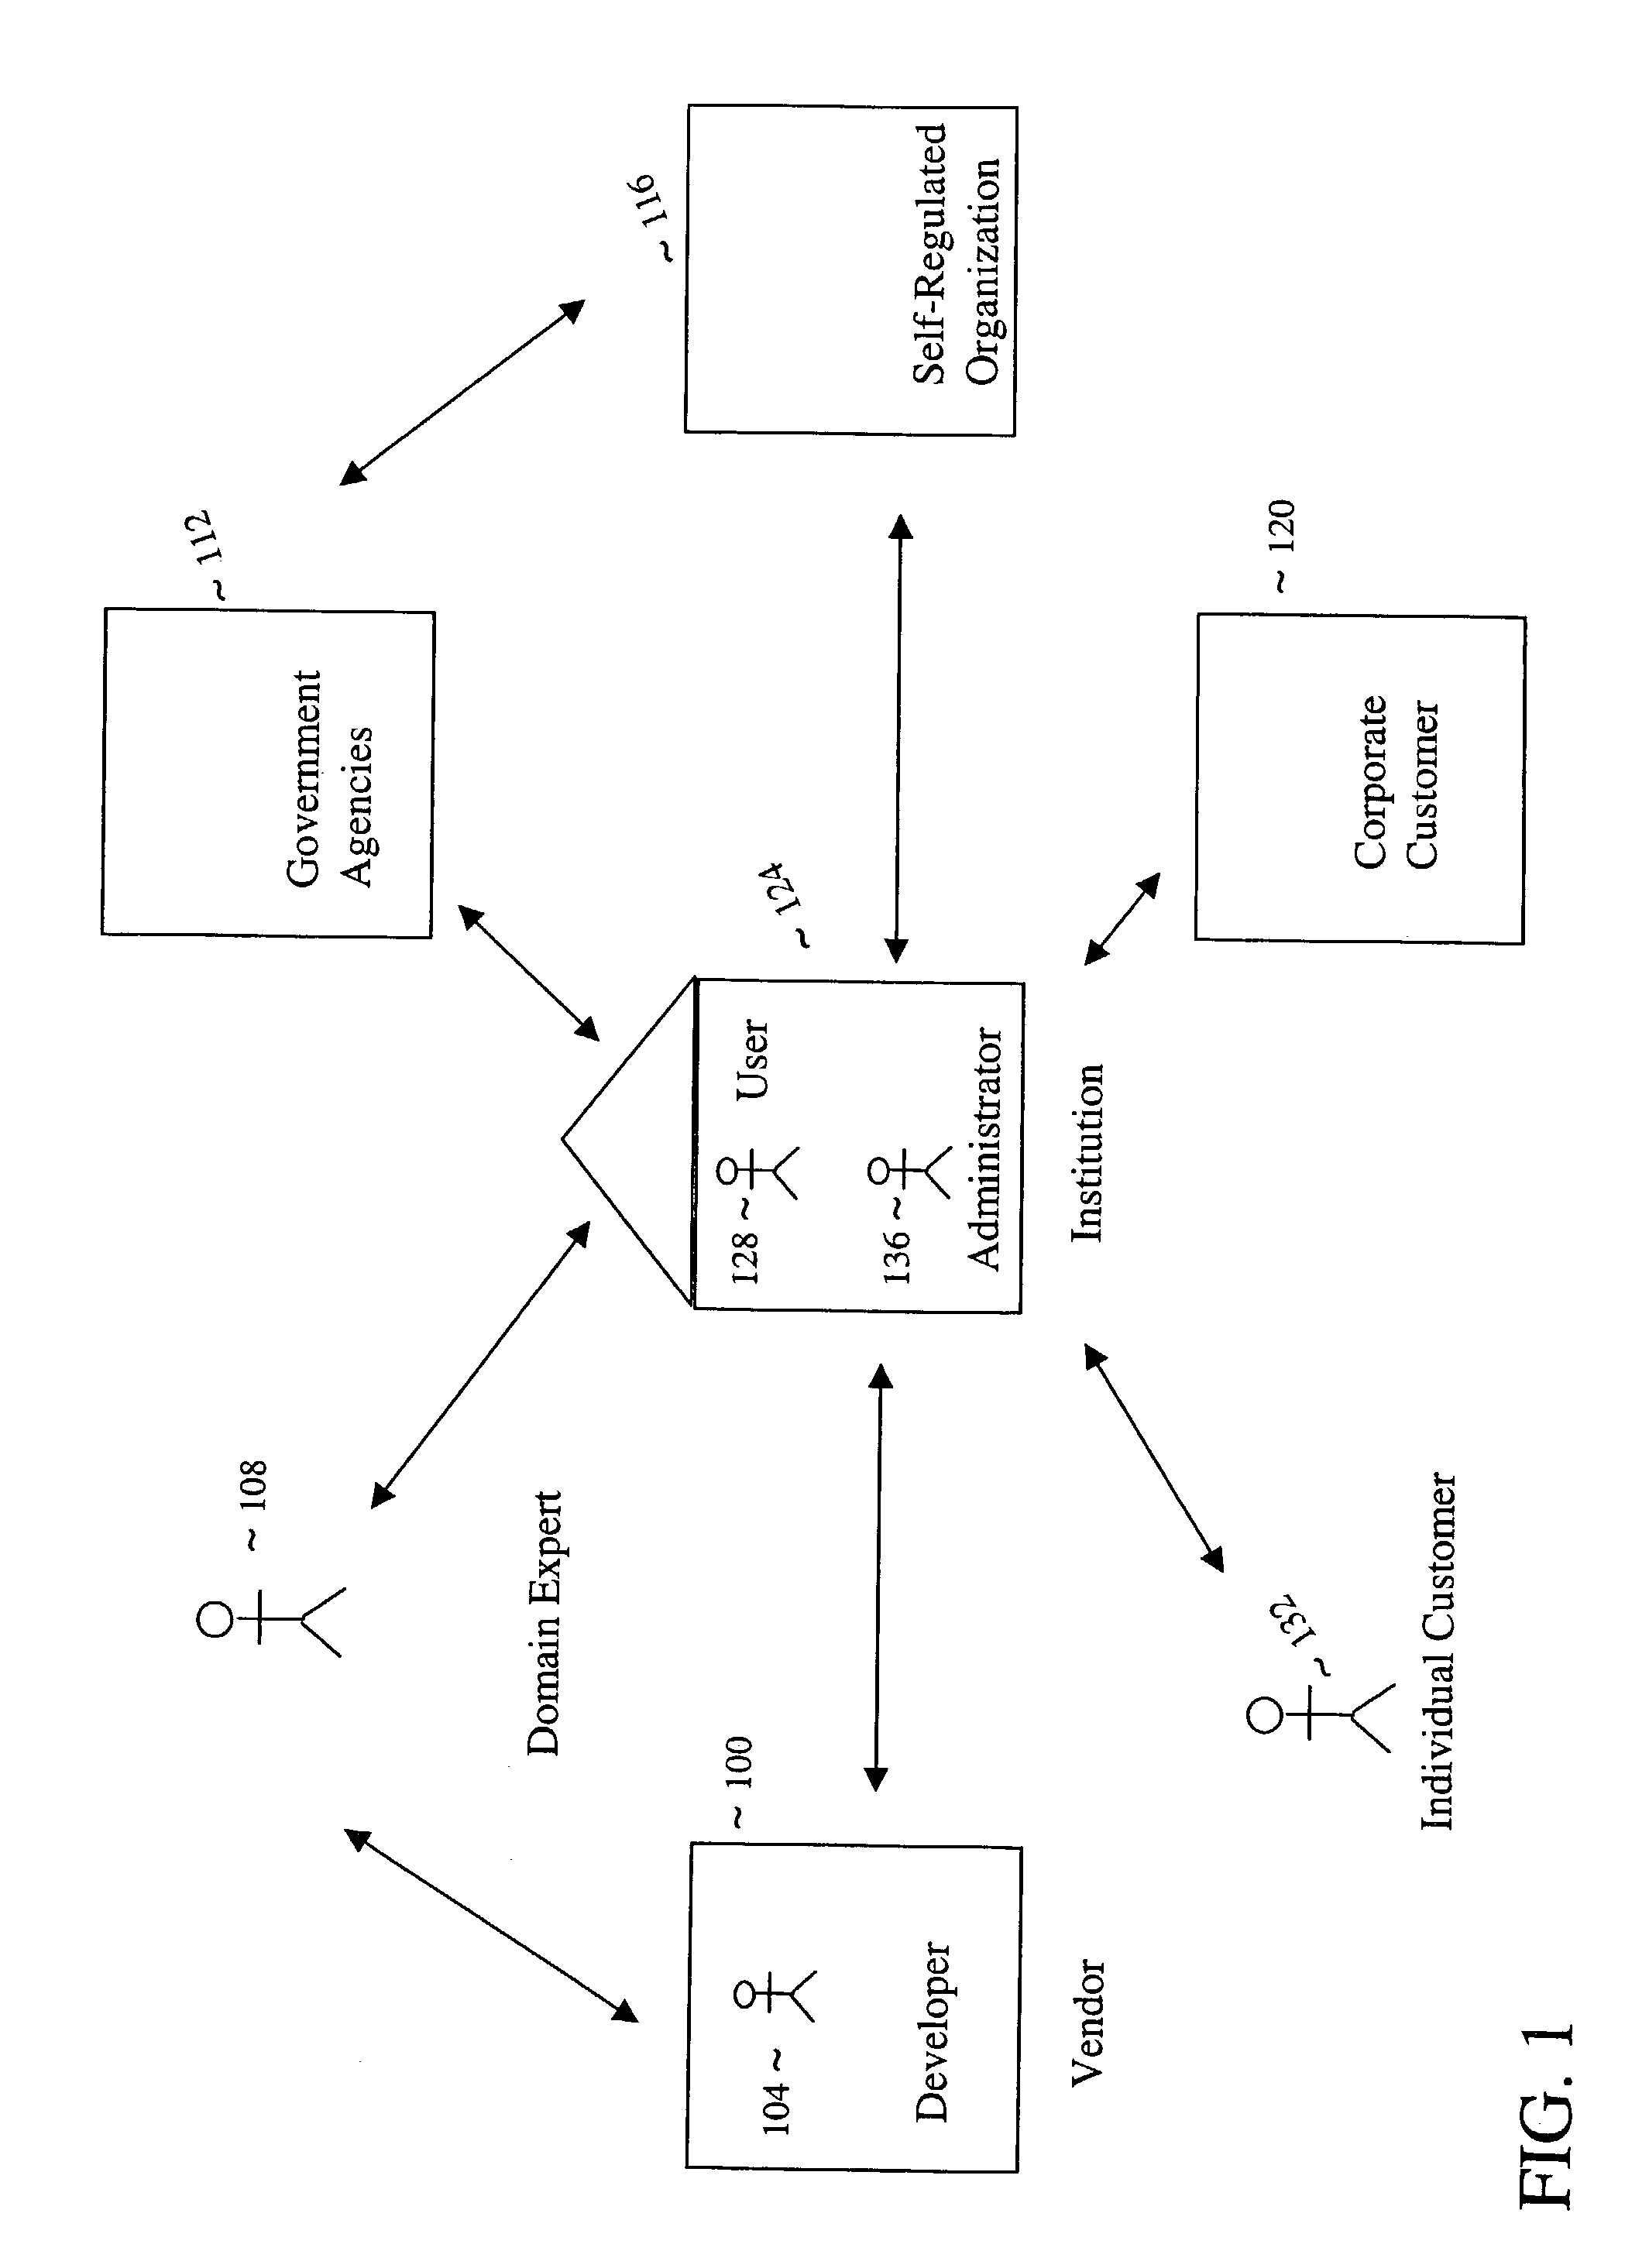 Method and system for advanced scenario based alert generation and processing